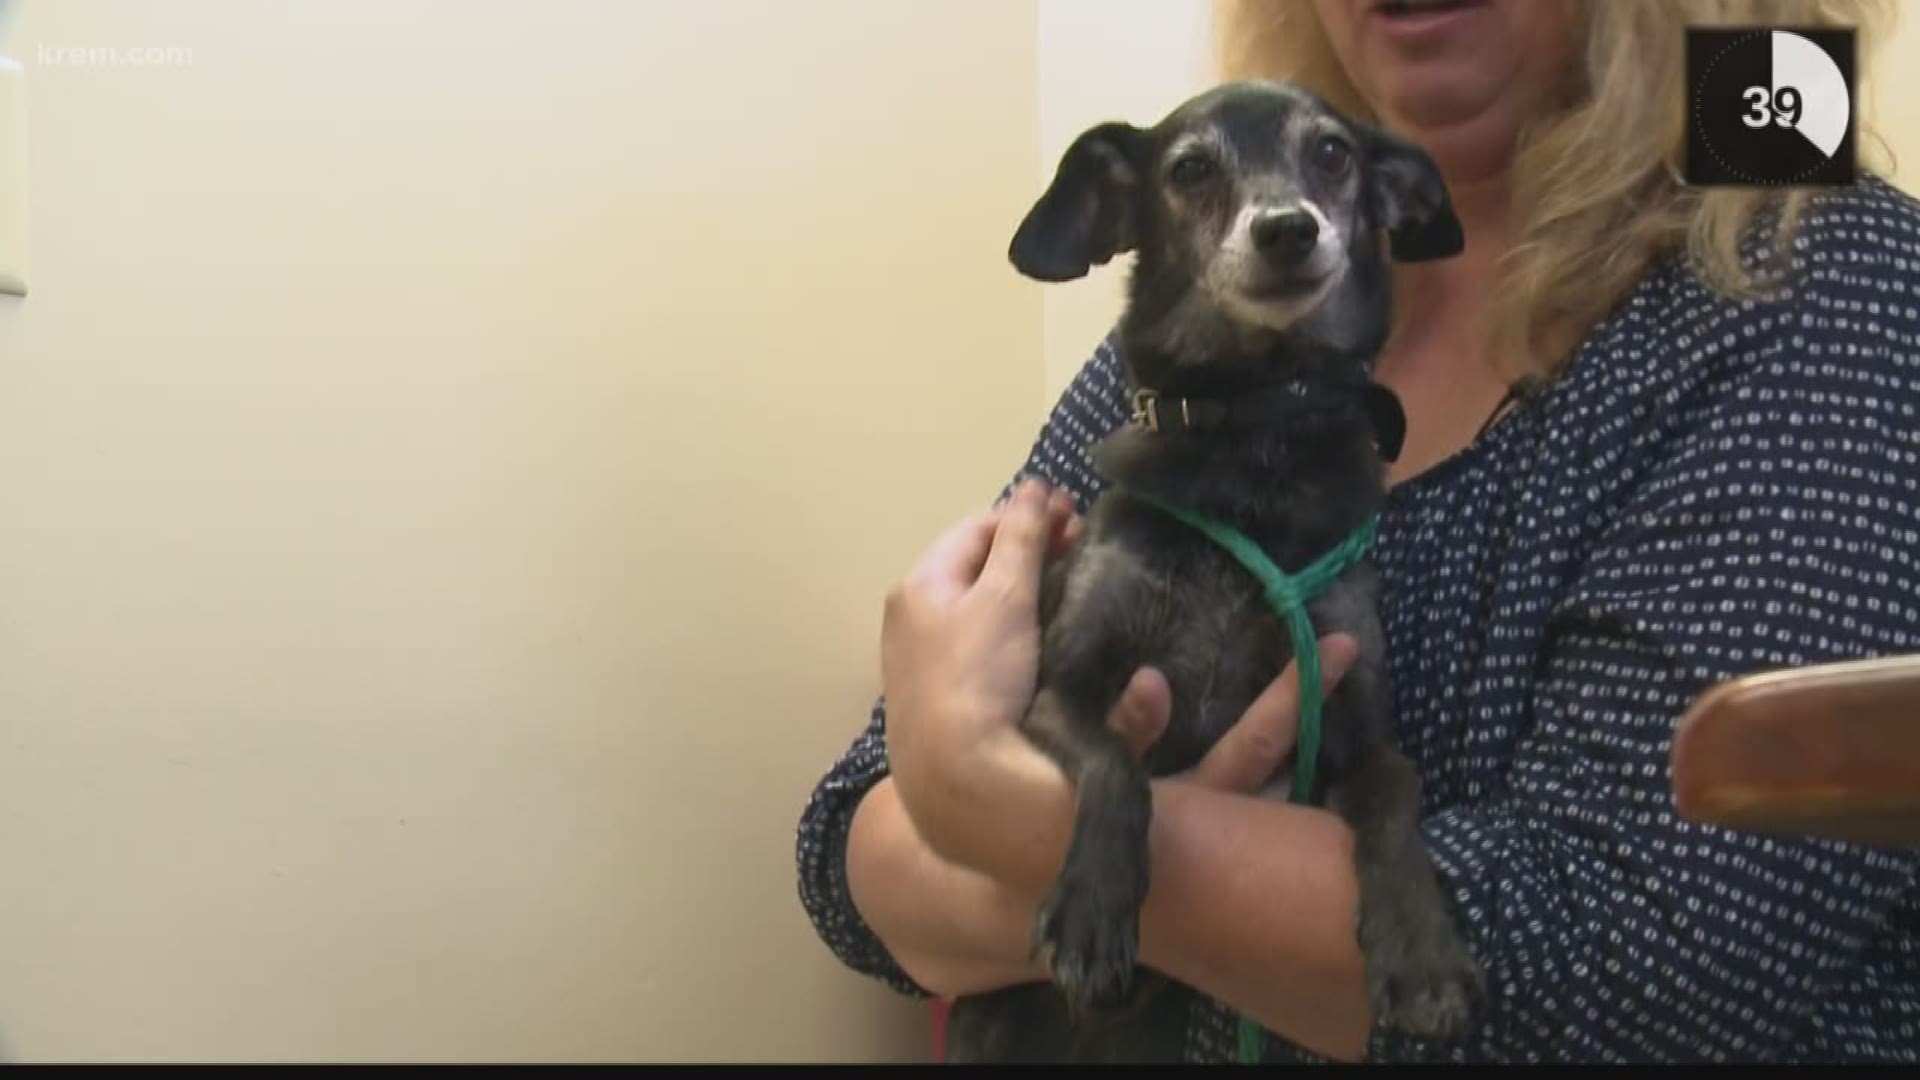 Jax, a 10-year-old chihuahua mix, came to Spokane from Arizona. He is looking to find his forever home at KREM 2's "Pets to Vets" event on Wednesday.